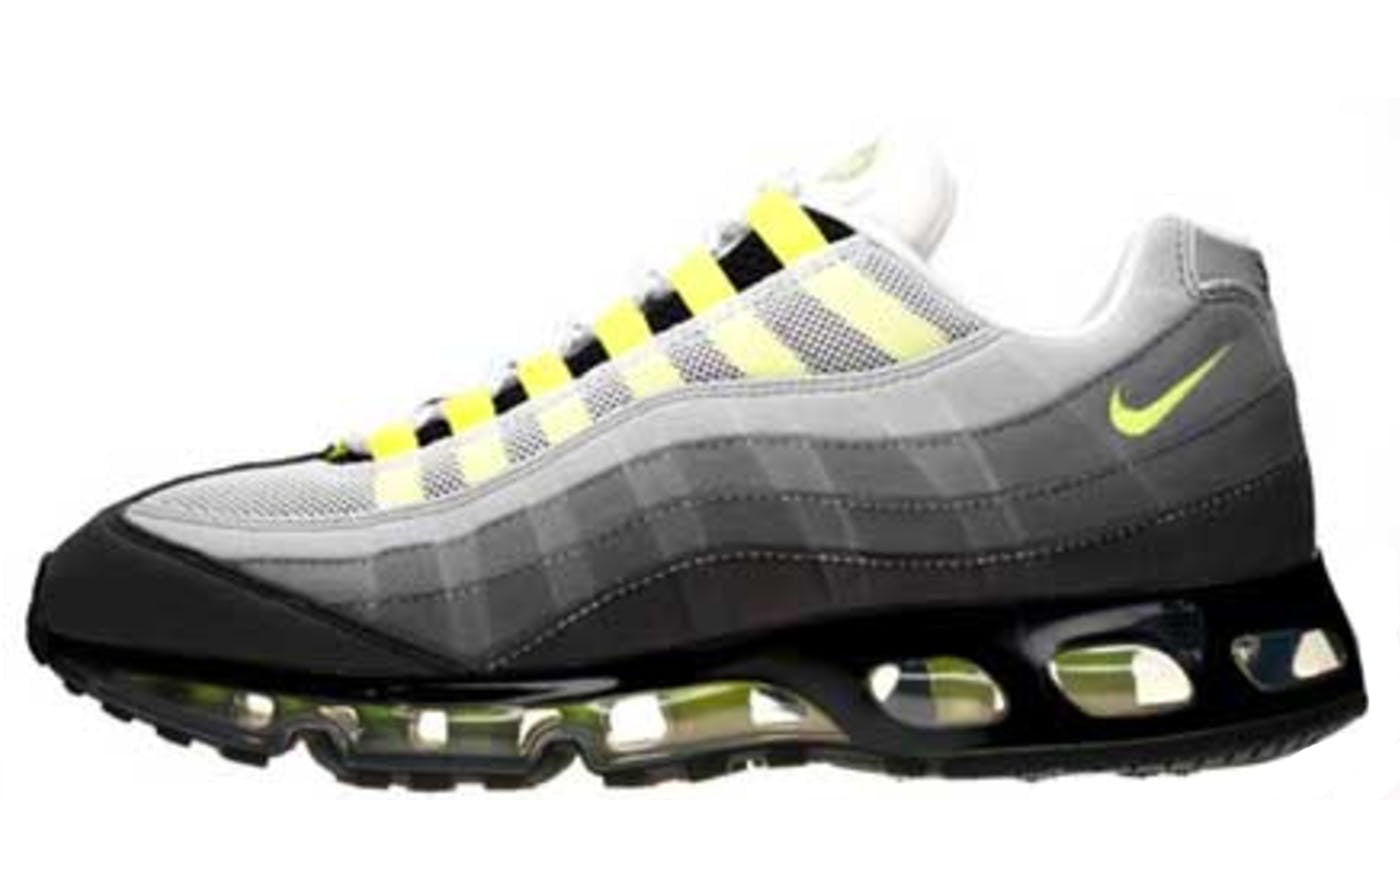 Nike Air Max 95 360 'One Time Only' Neutral Grey/Neon Yellow-Medium Grey 315350-071 sneakmarks